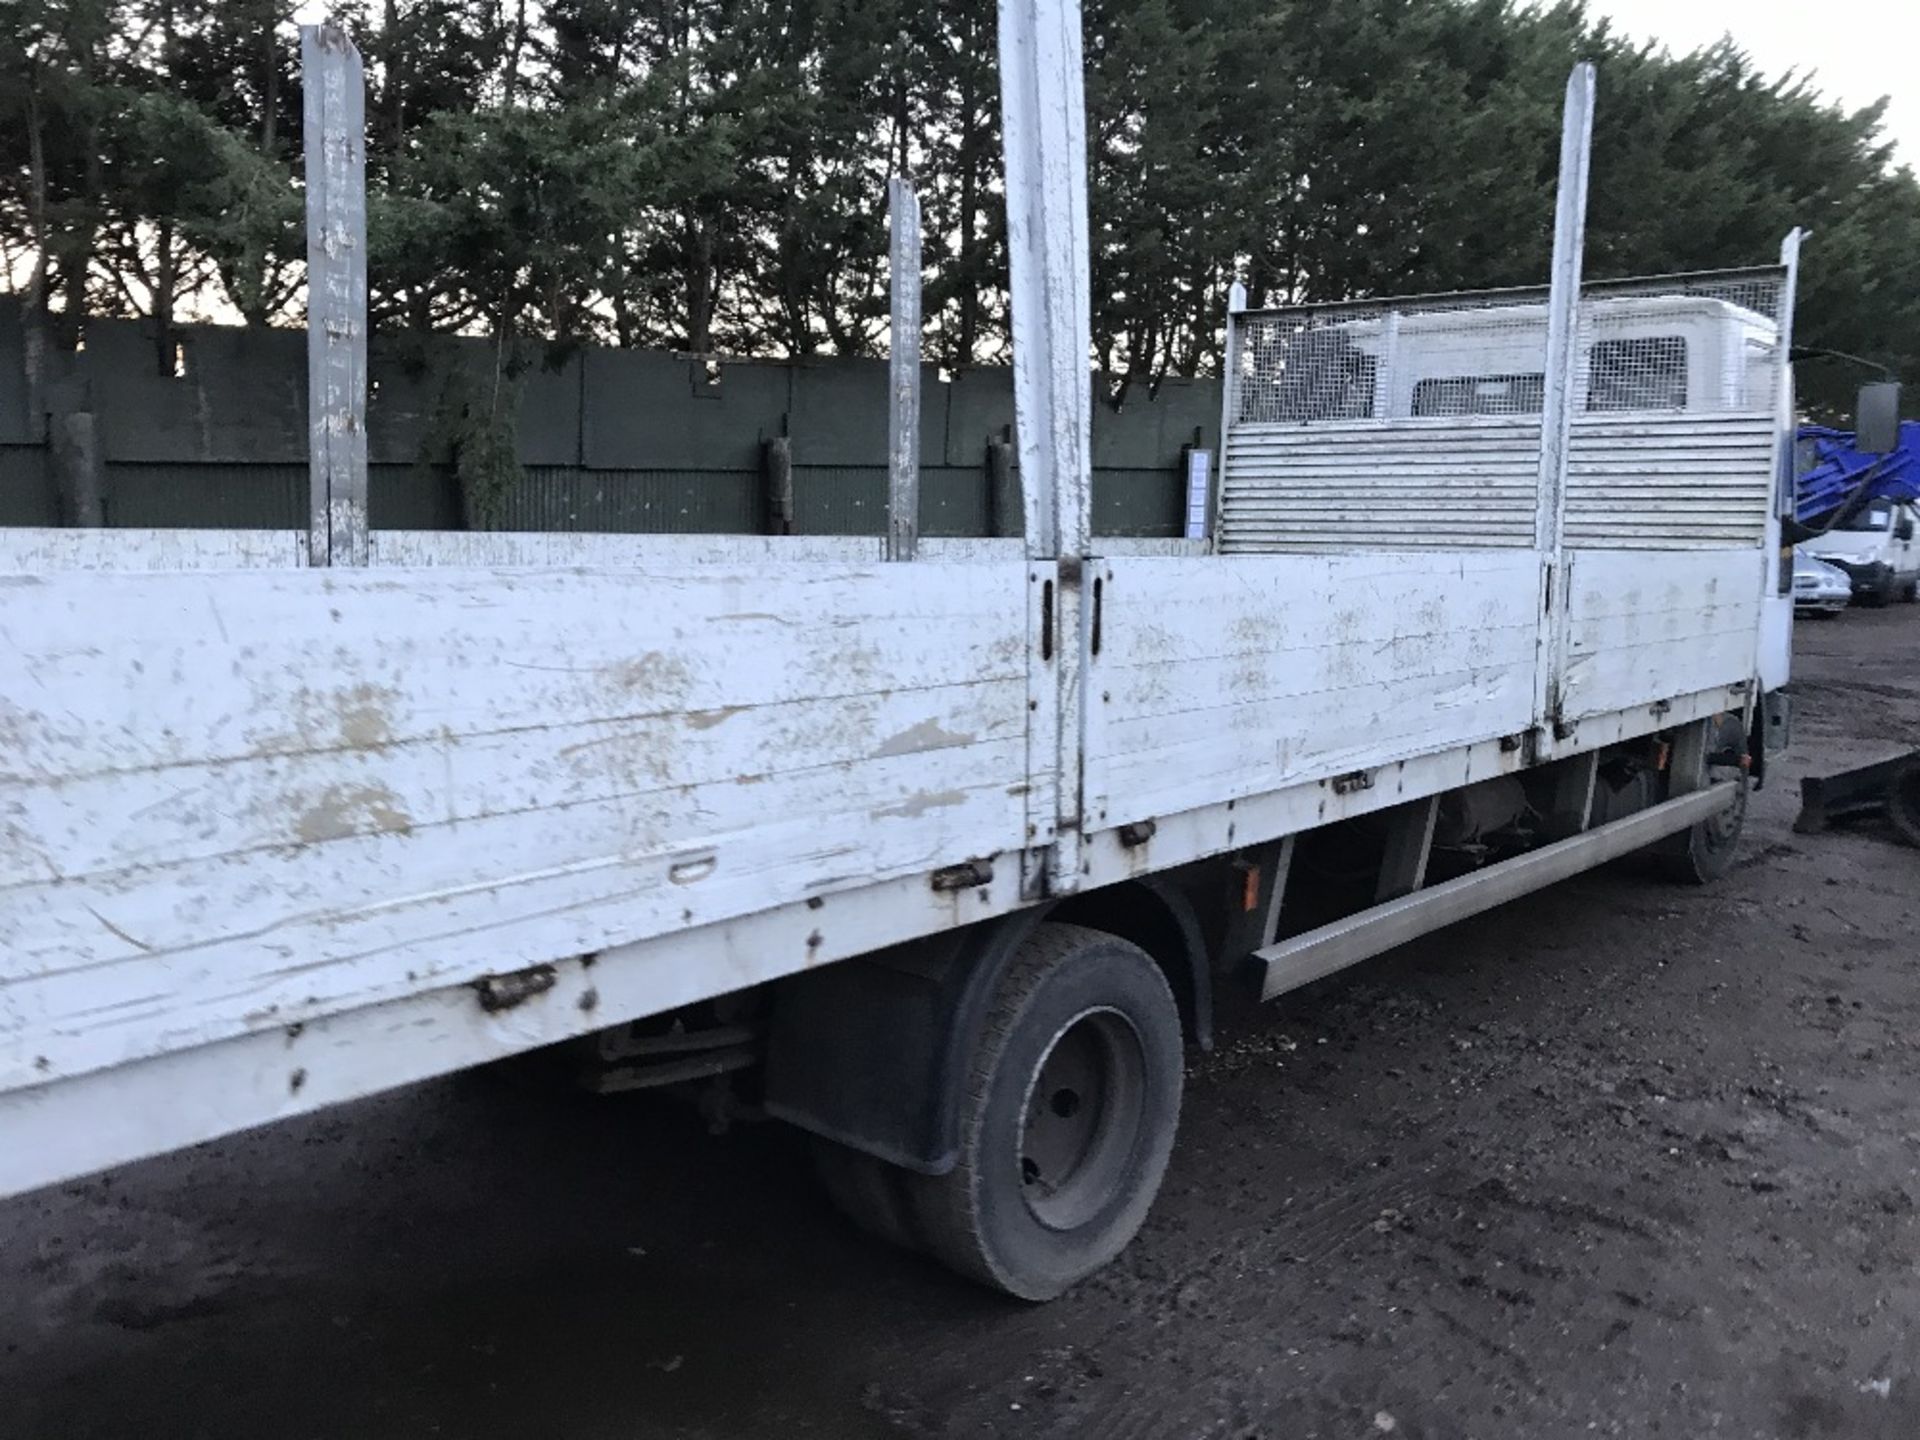 FORD EUROCARGO 22FT FLAT BED 7.5T, REG: RK03 CZR TEST TO JANUARY 2019 WHEN TESTED WAS SEEN TO DRIVE, - Image 8 of 11